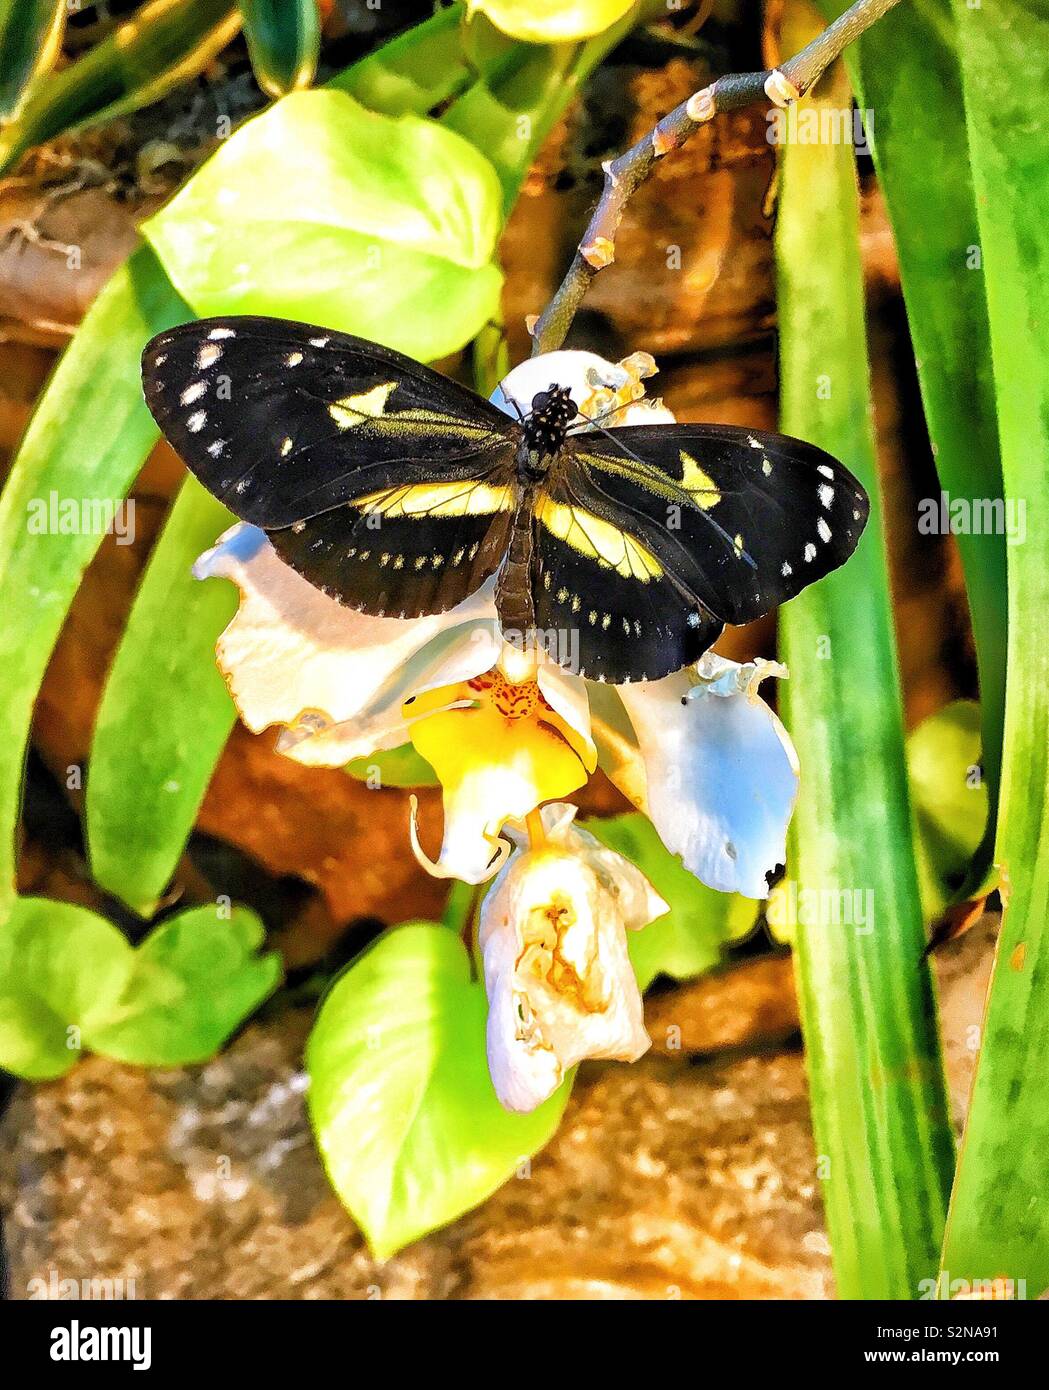 Black butterfly with yellow stripes and white spotted wings sits on white orchid with yellow center Stock Photo